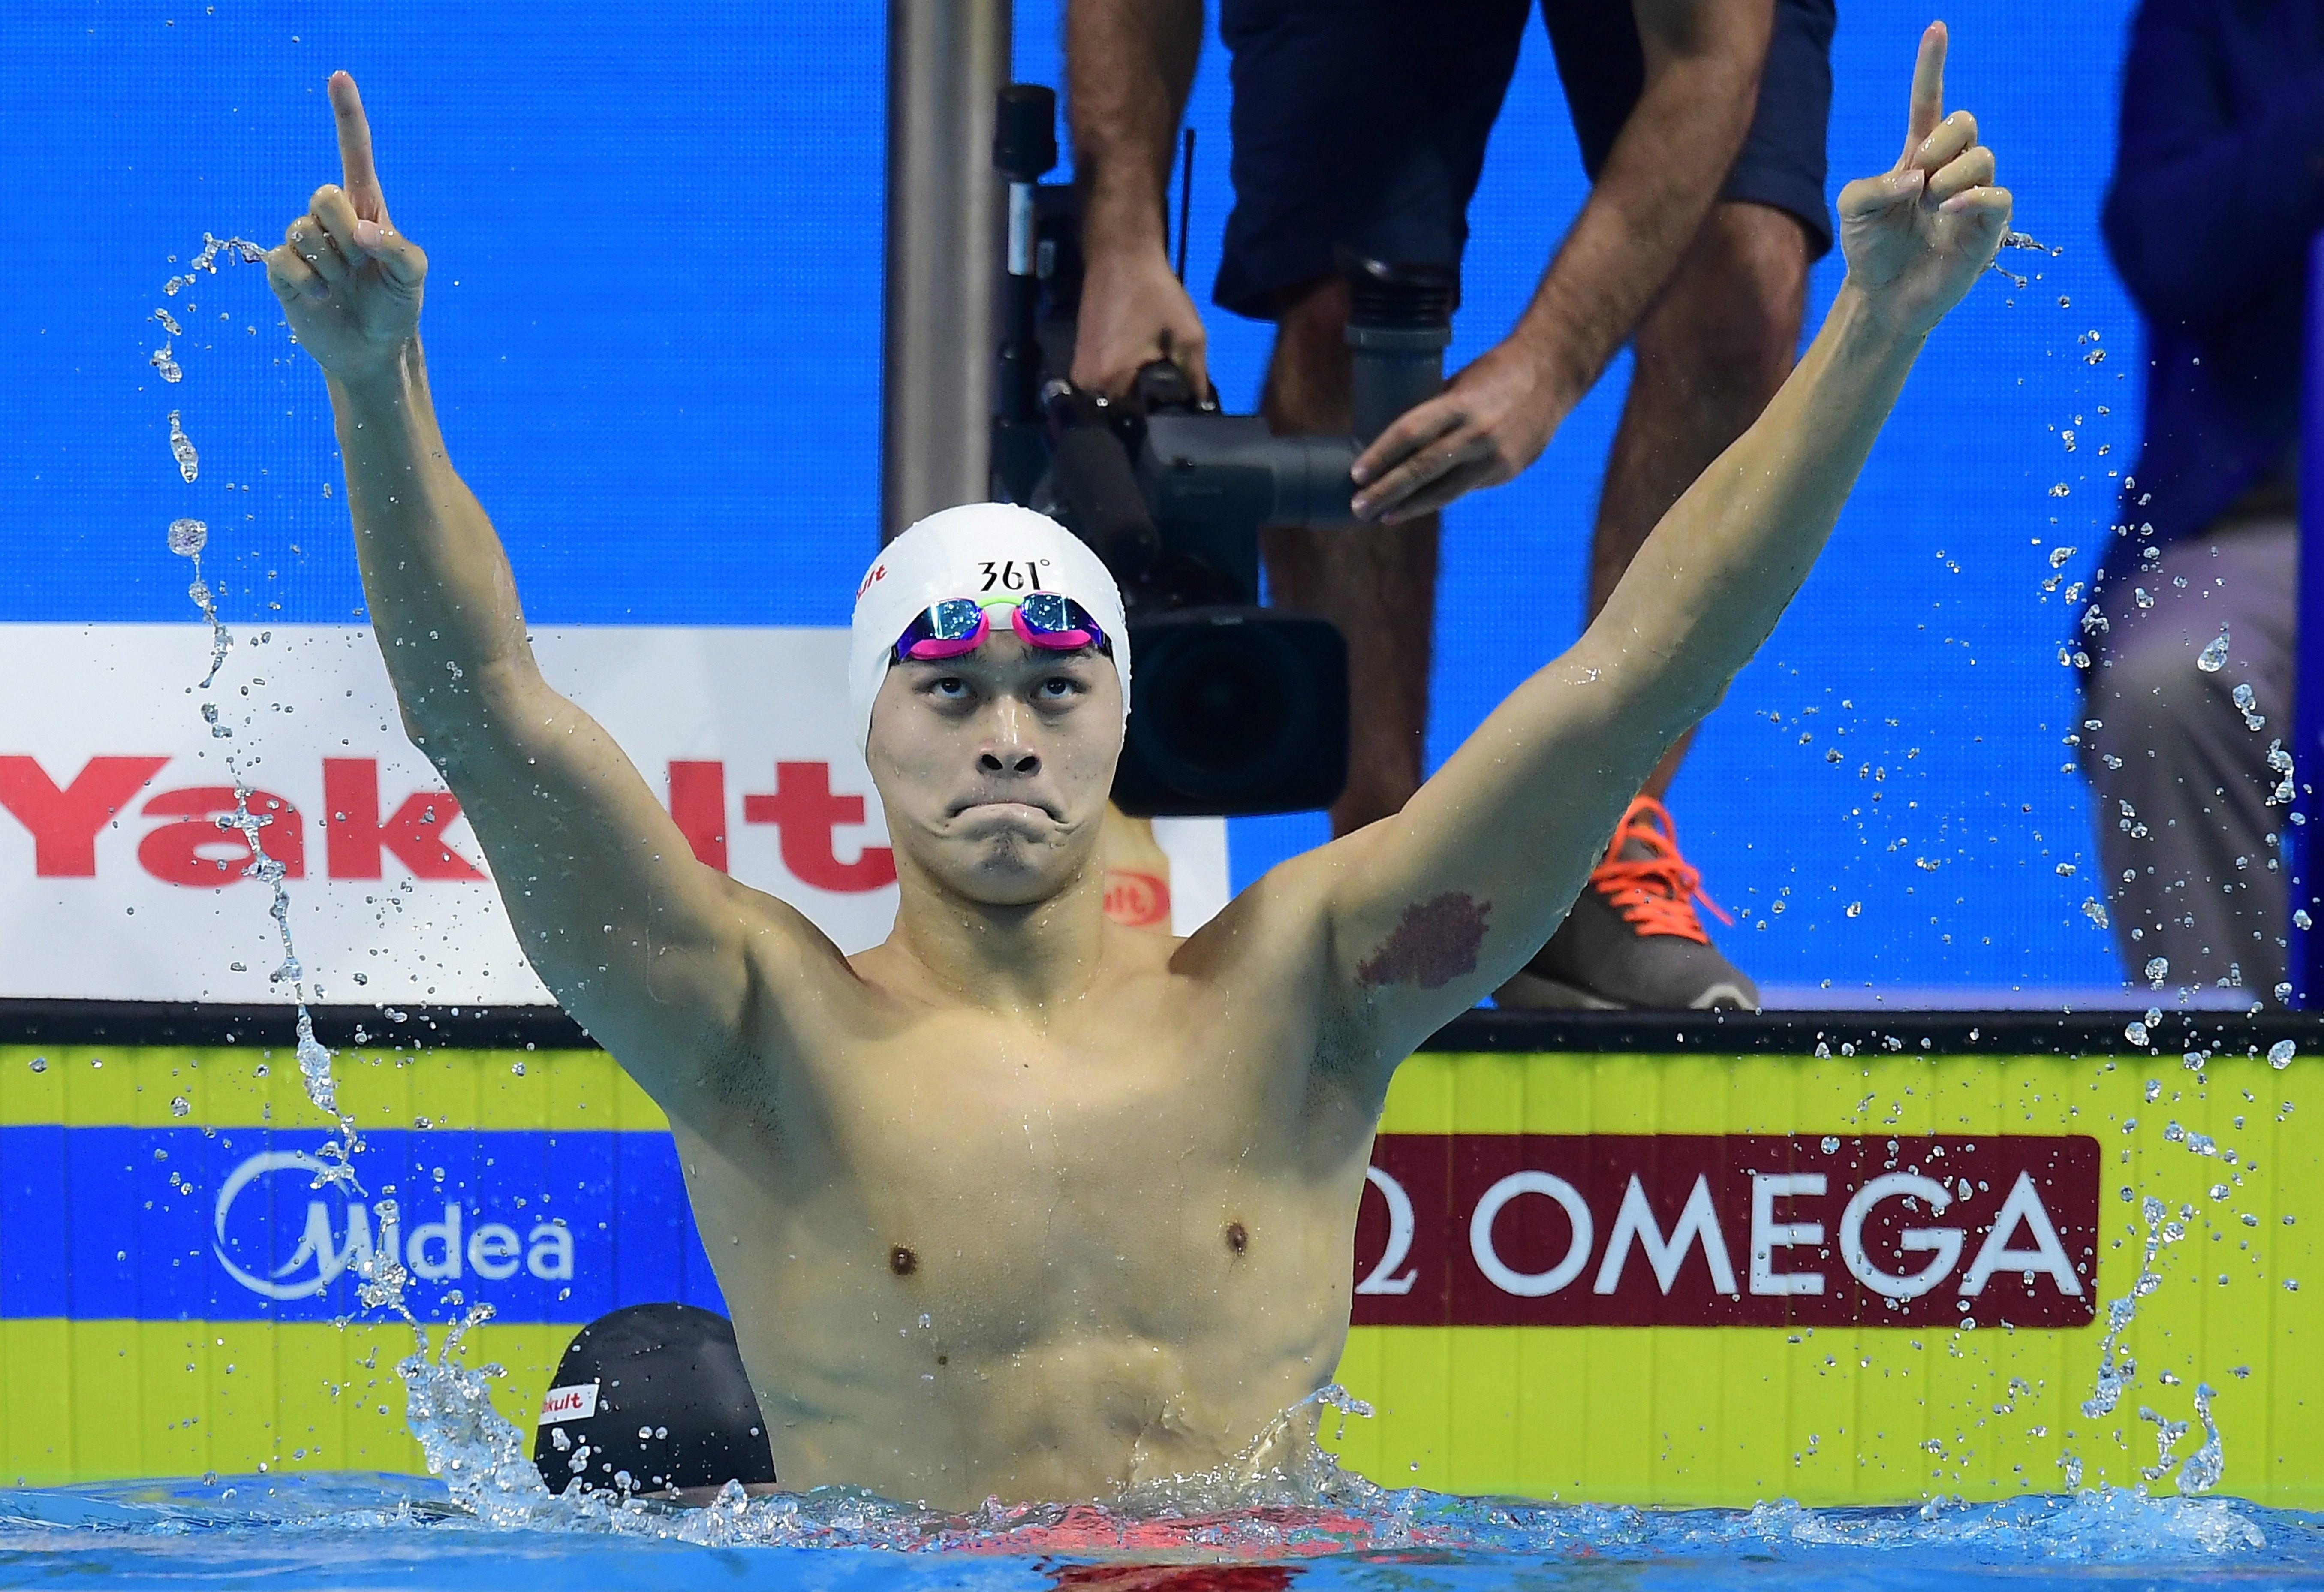 China’s swimming superstar gets off to a flying start as he wins the first of his seven targeted golds in Tianjin, giving his rivals no chance in his pet event